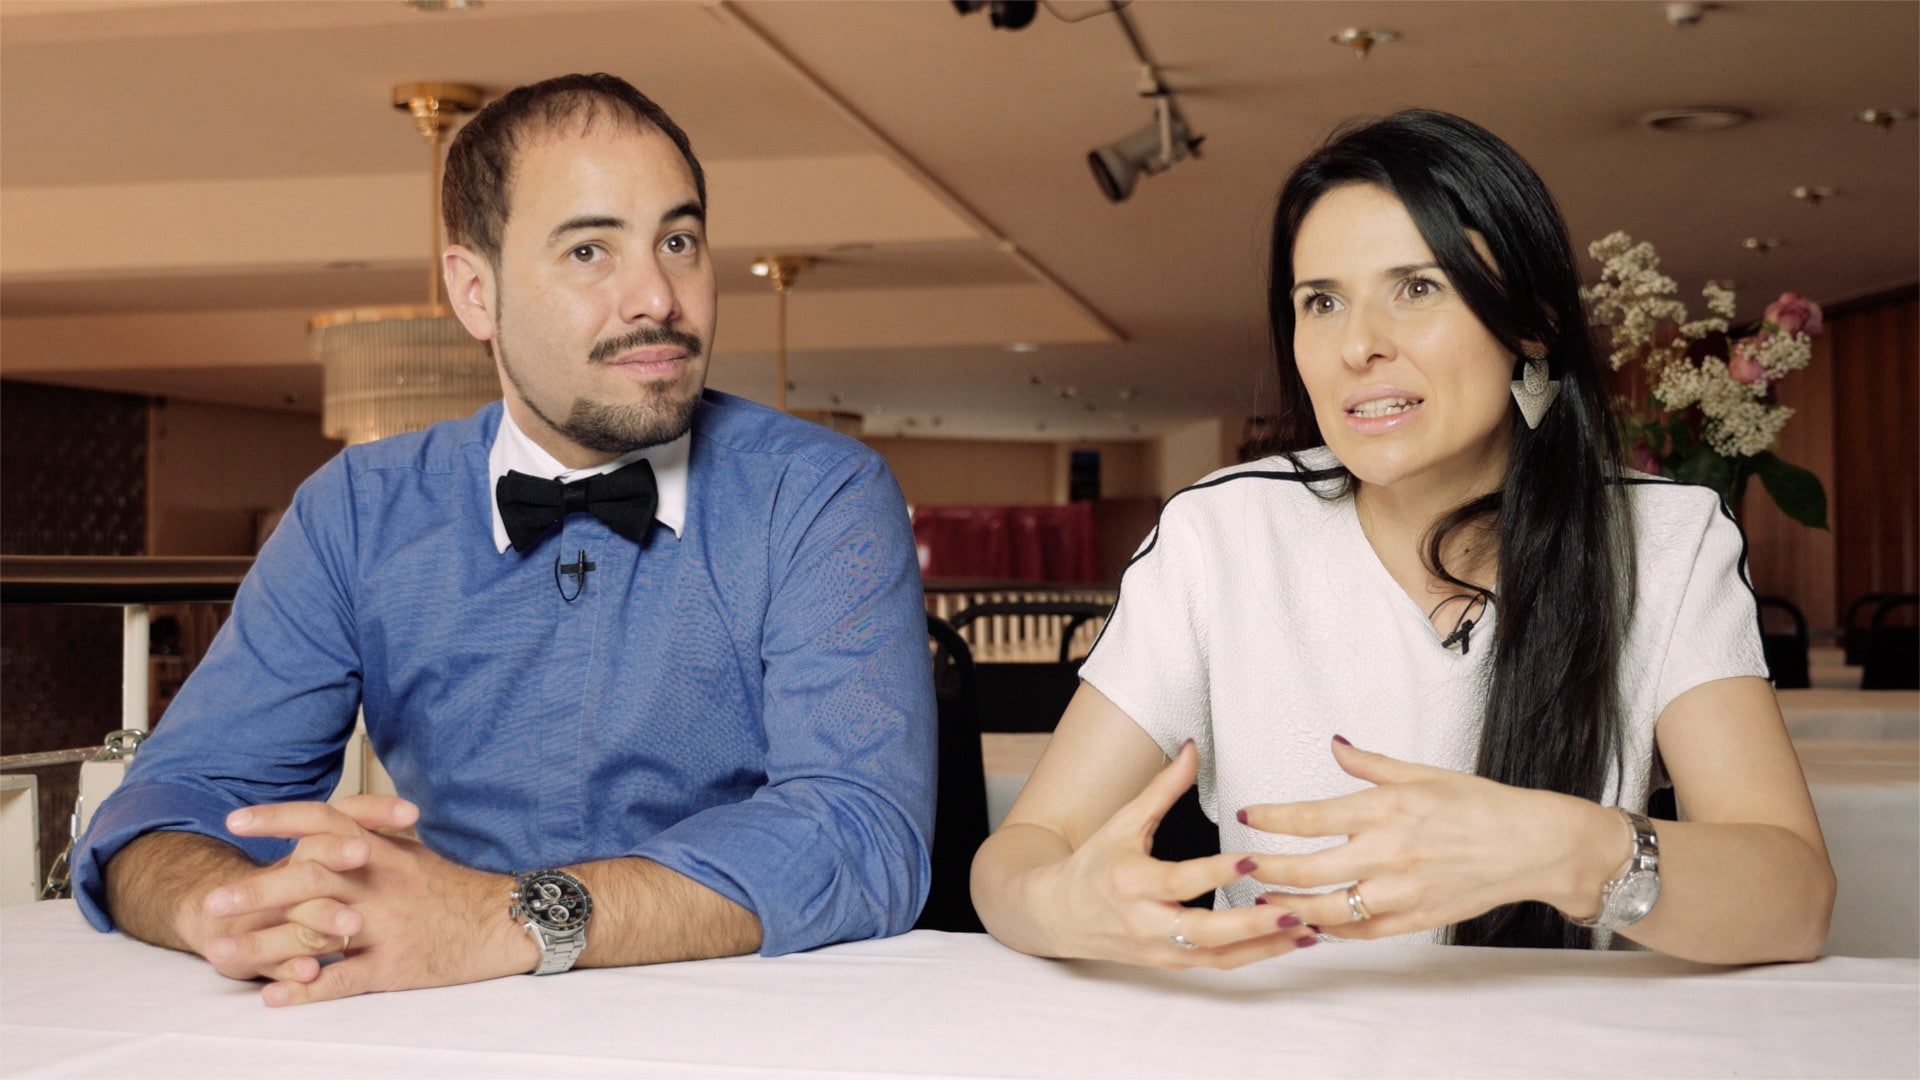 Video Preview Image of Cristina Sosa and Daniel Nacucchio about the role of the woman in Tango » 030tango Short